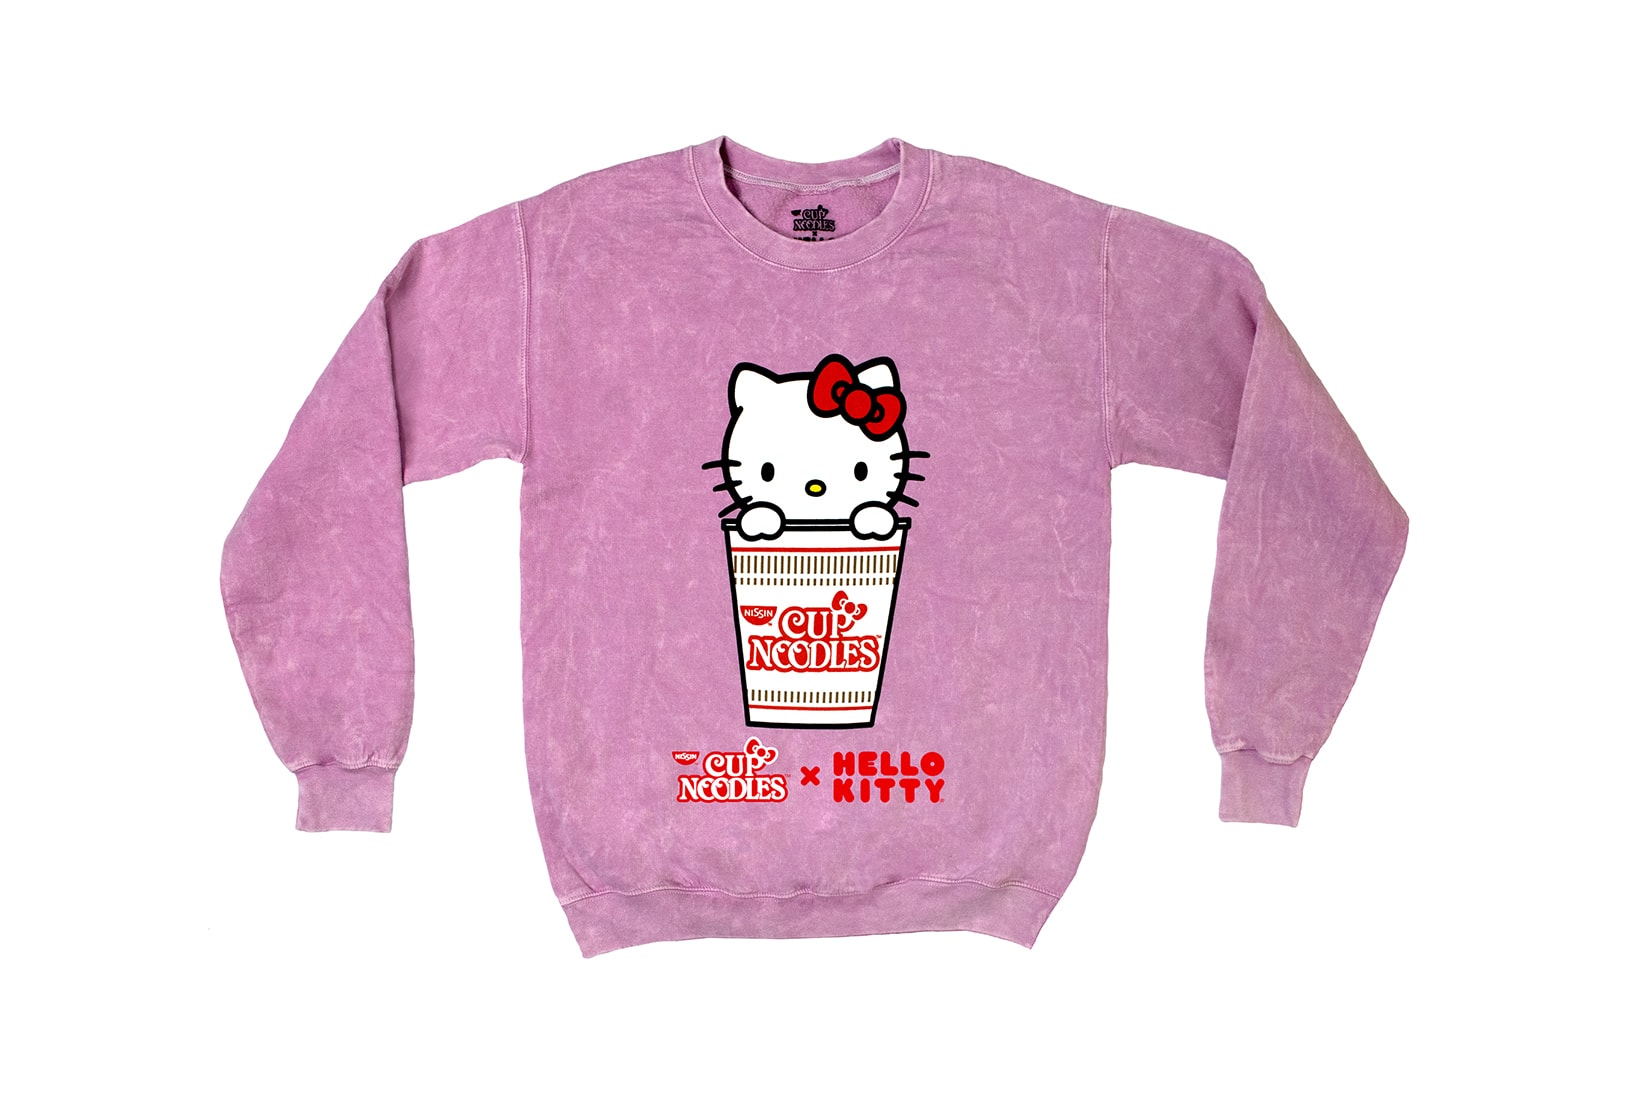 Hello Kitty Sanrio x Cup Noodles Collaboration Sweater Pink